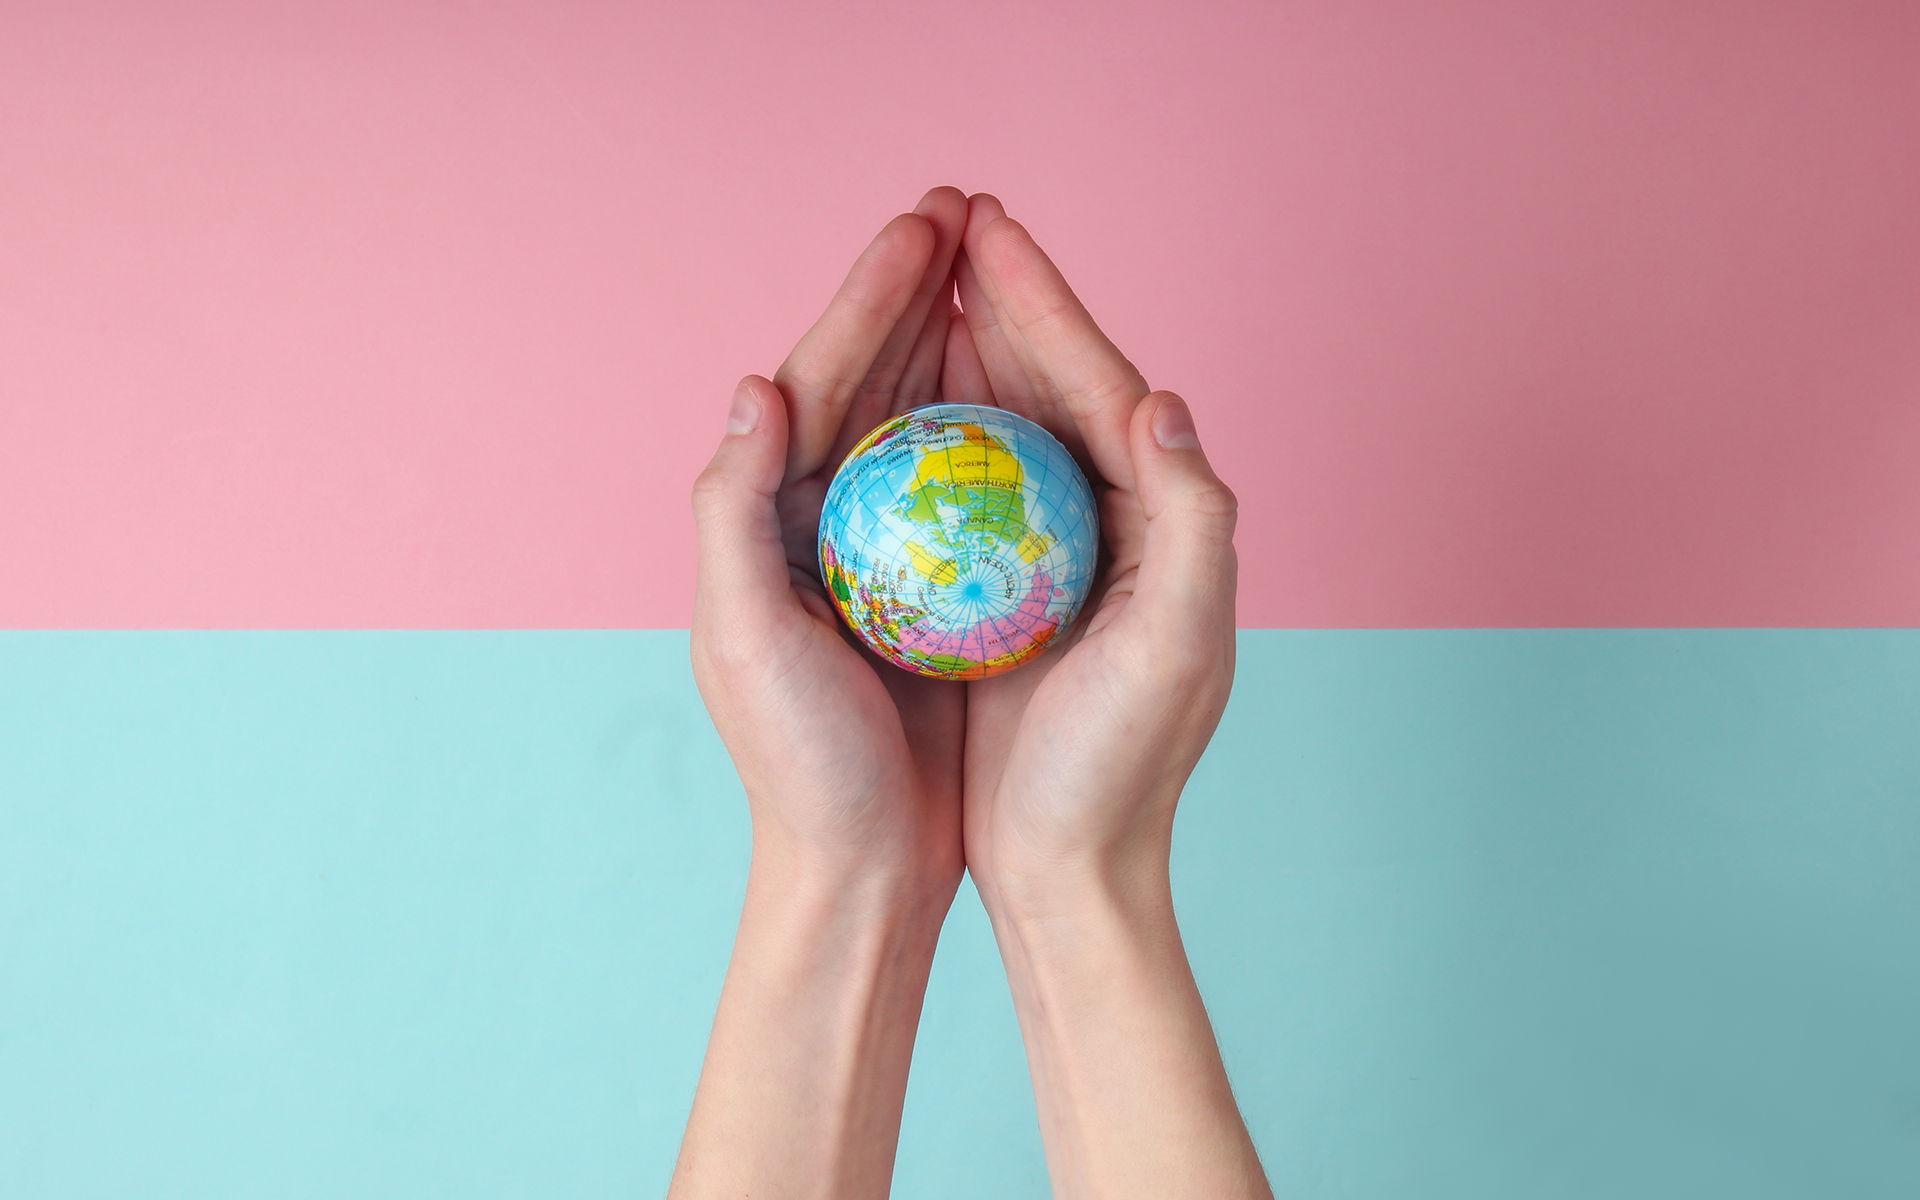 Do You Know How You Can Change the World?—We look down on someone's hands that are cupped together holding a small globe. The top half of the background is pink and the bottom half is light blue.